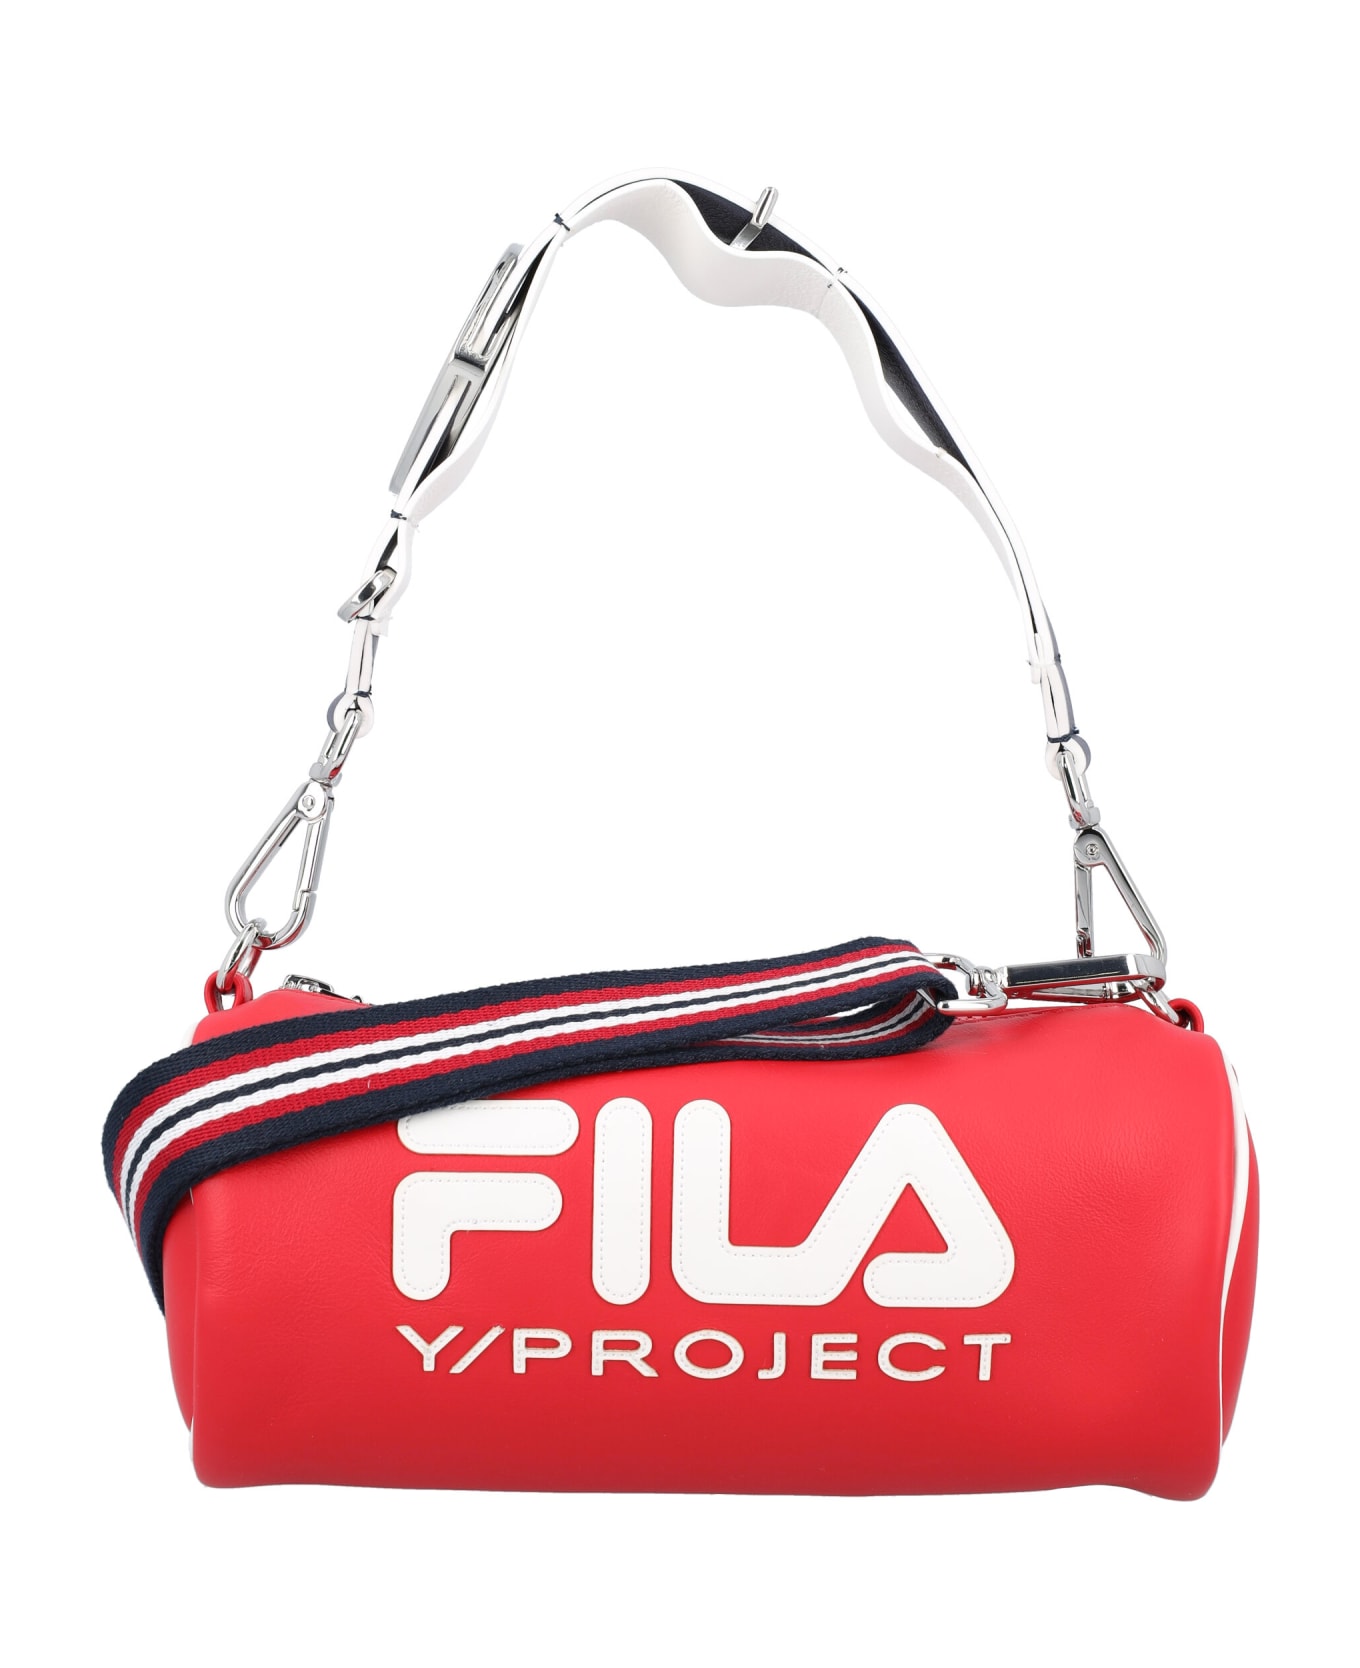 Y/Project Strap Bag - RED